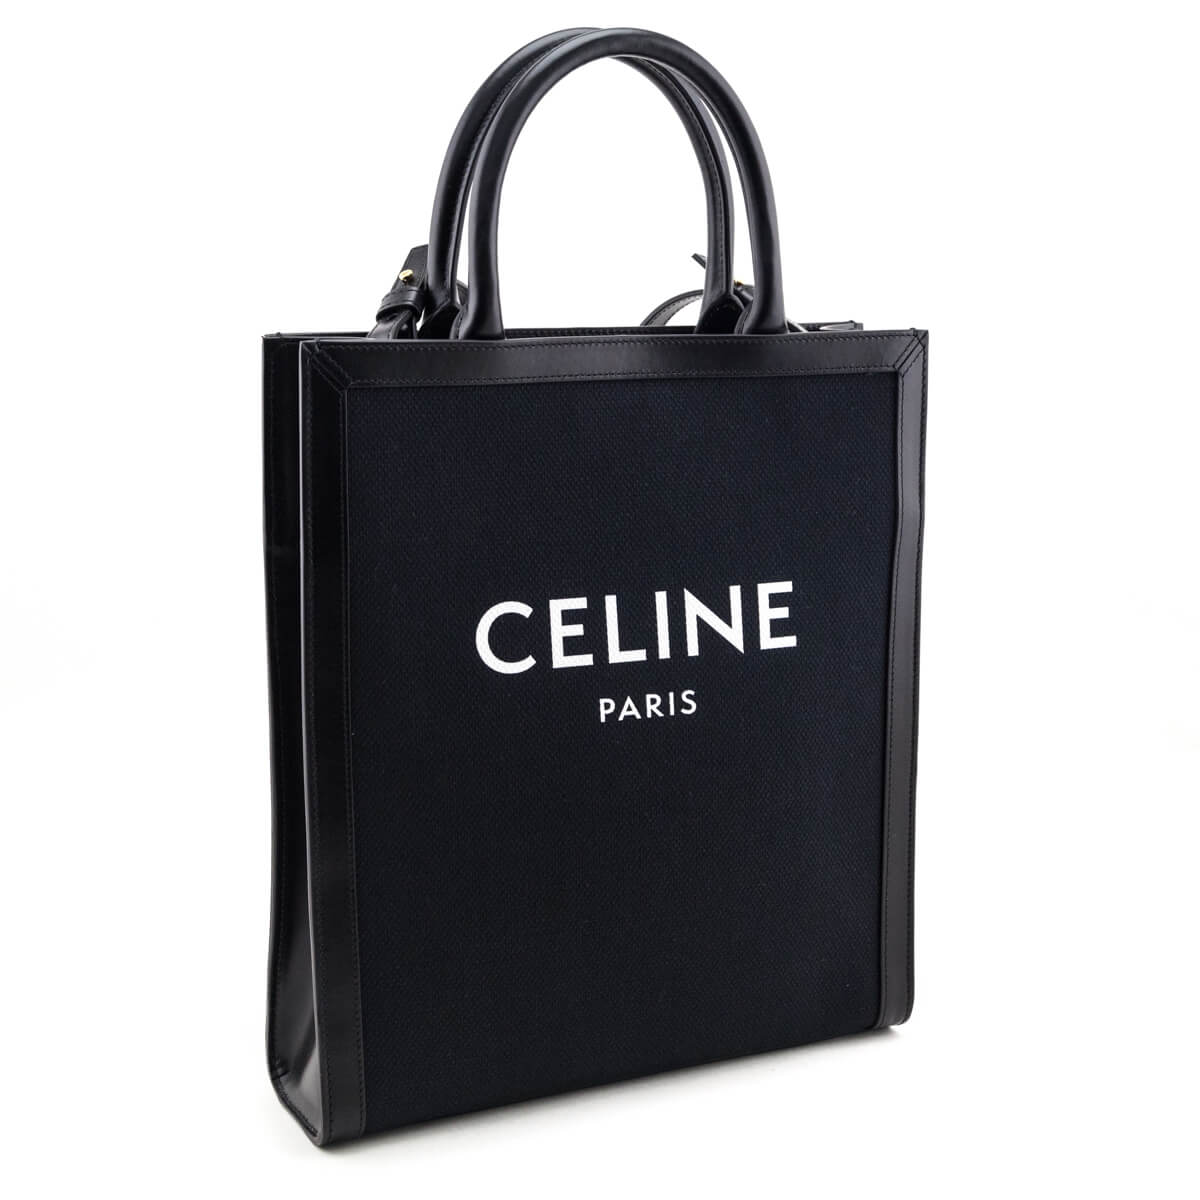 Celine Black Canvas & Calfskin Small Vertical Cabas Tote - Love that Bag etc - Preowned Authentic Designer Handbags & Preloved Fashions